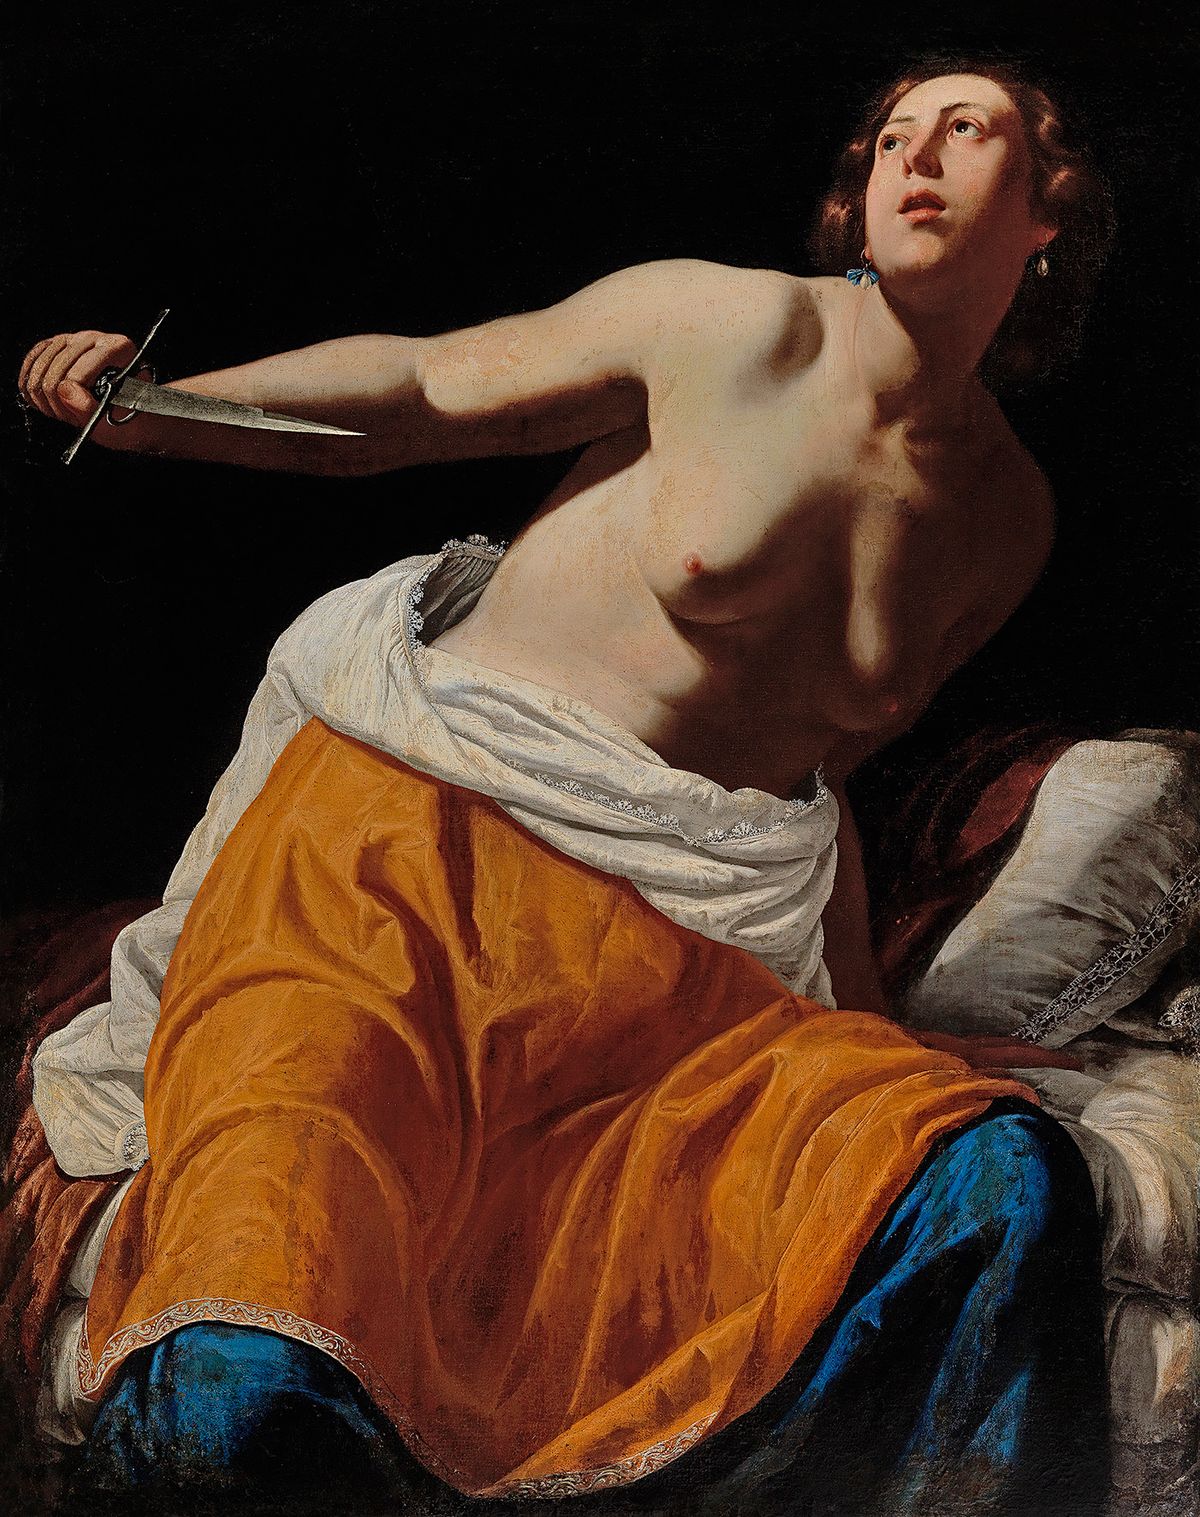 Lucretia, by the female Italian Baroque painter Artemisia Gentileschi, has never before been publicly exhibited Courtesy of Dorotheum